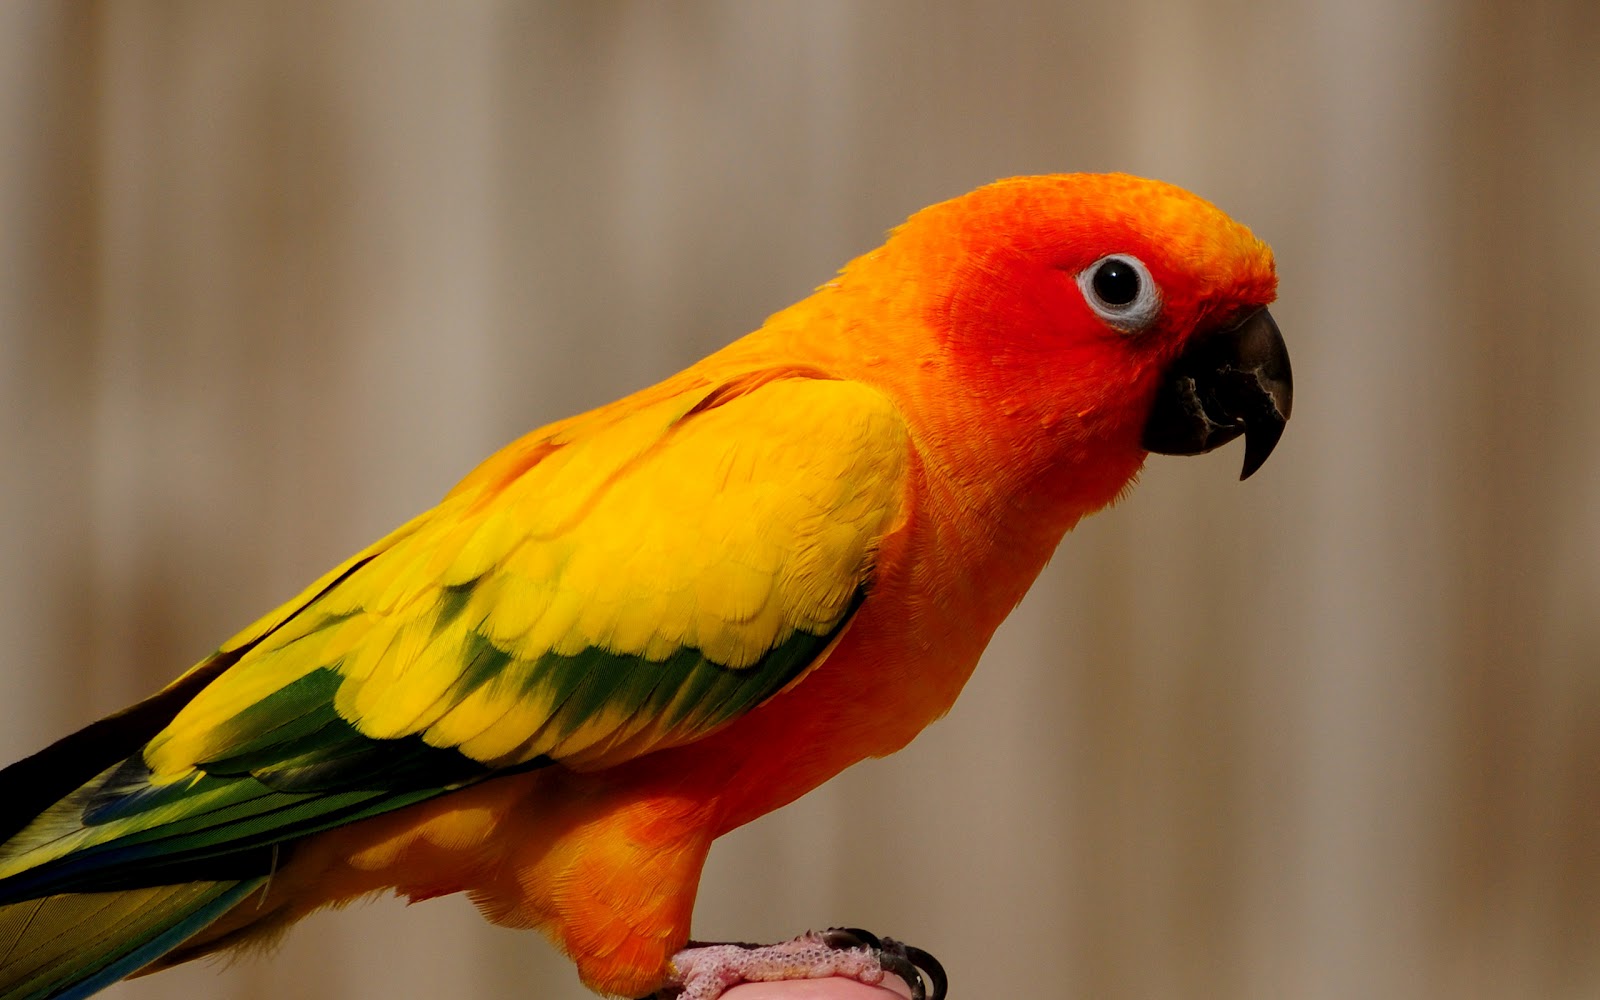 hd parrot wallpaper with a orange yellow parrot background picturejpg